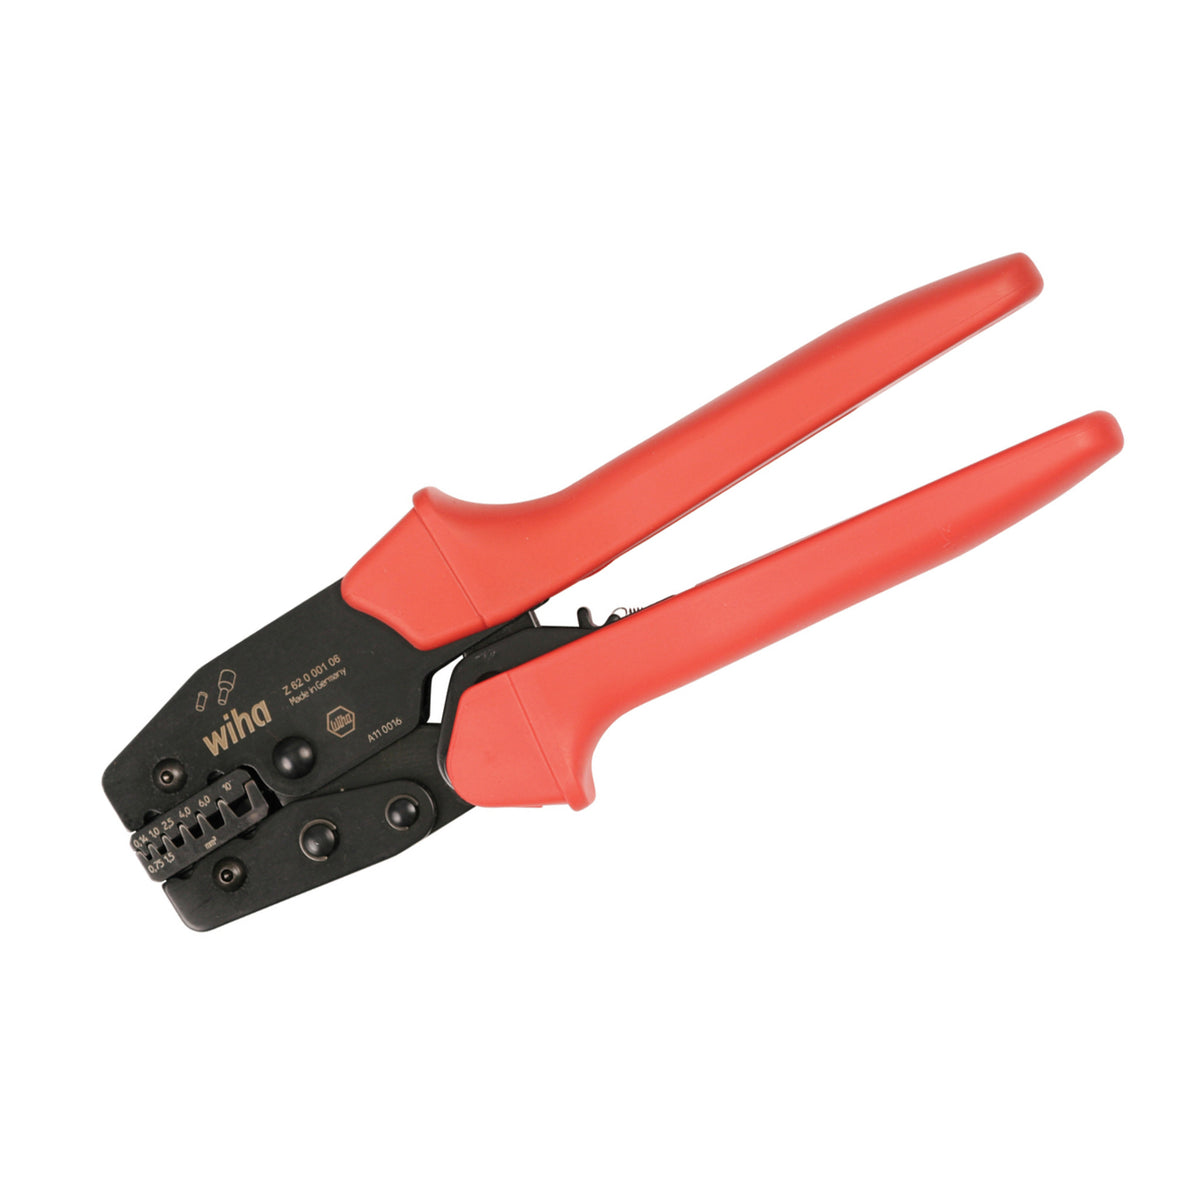 Wiha 32928 Insulated Bent Nose Pliers 6.3 inch